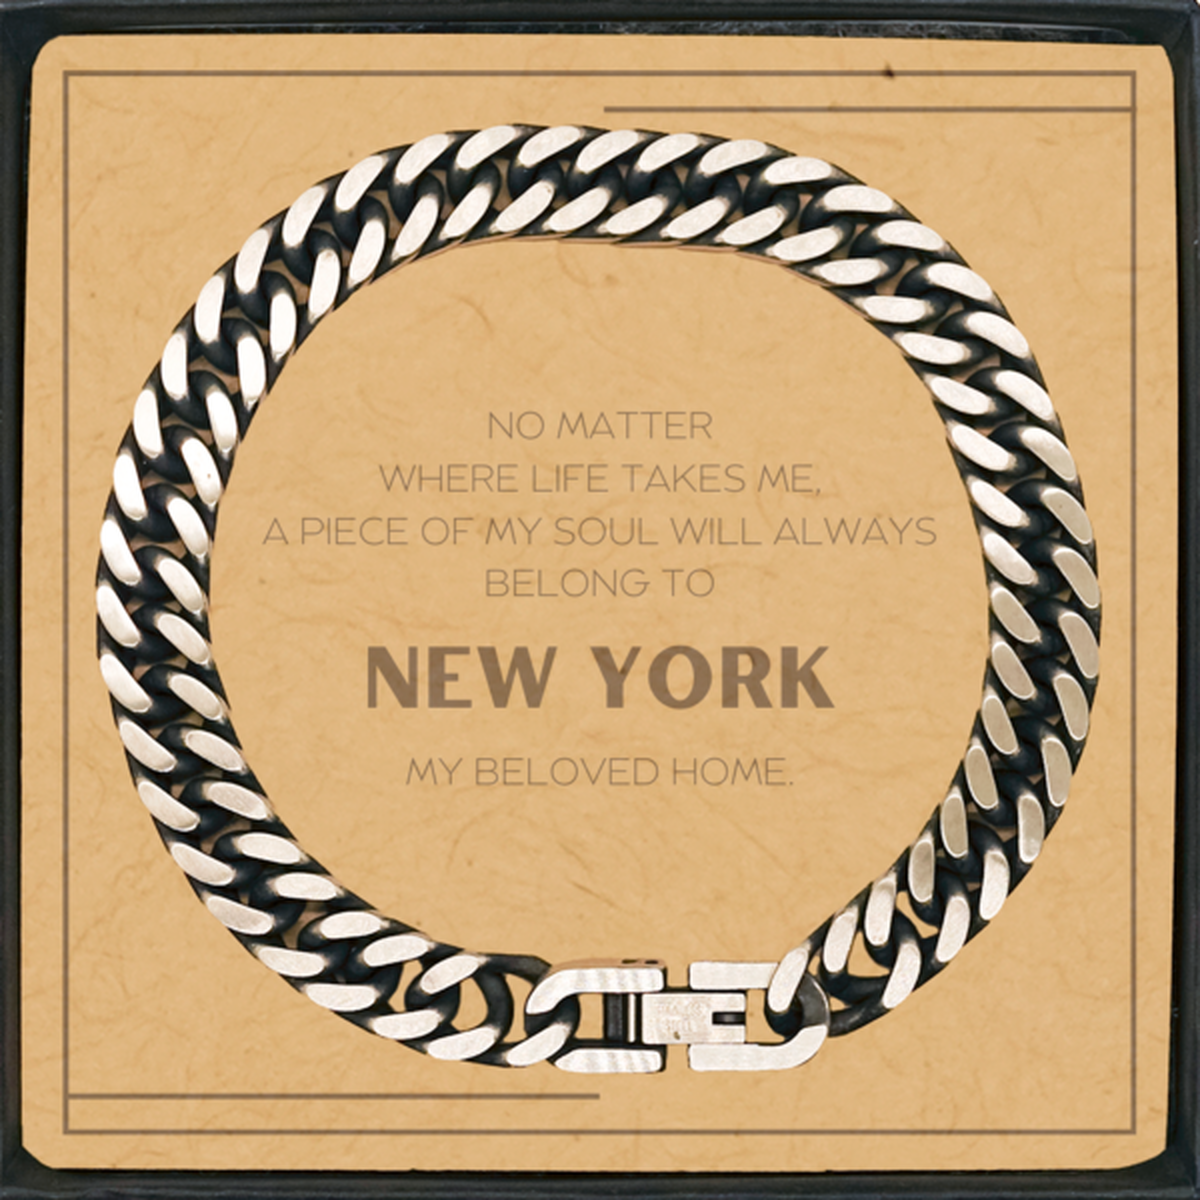 Love New York State Gifts, My soul will always belong to New York, Proud Cuban Link Chain Bracelet, Birthday Unique Gifts For New York Men, Women, Friends